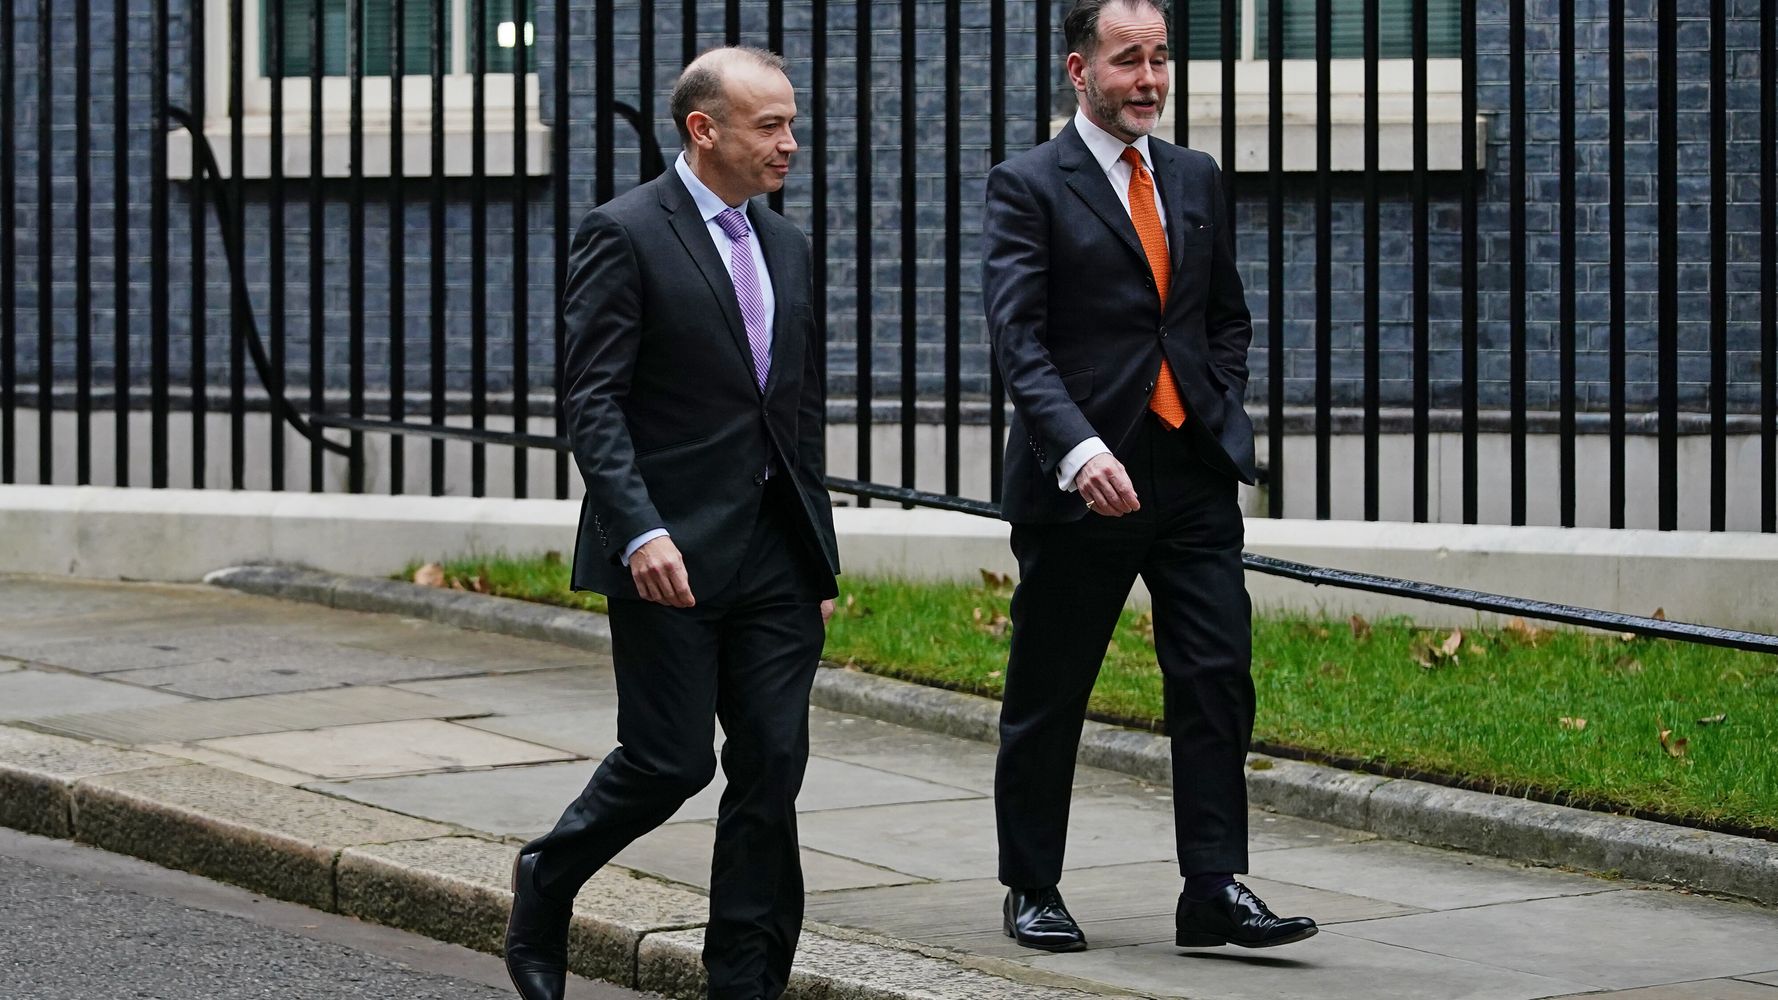 The Downing Street Line On Chris Pincher Is Becoming Increasingly Untenable